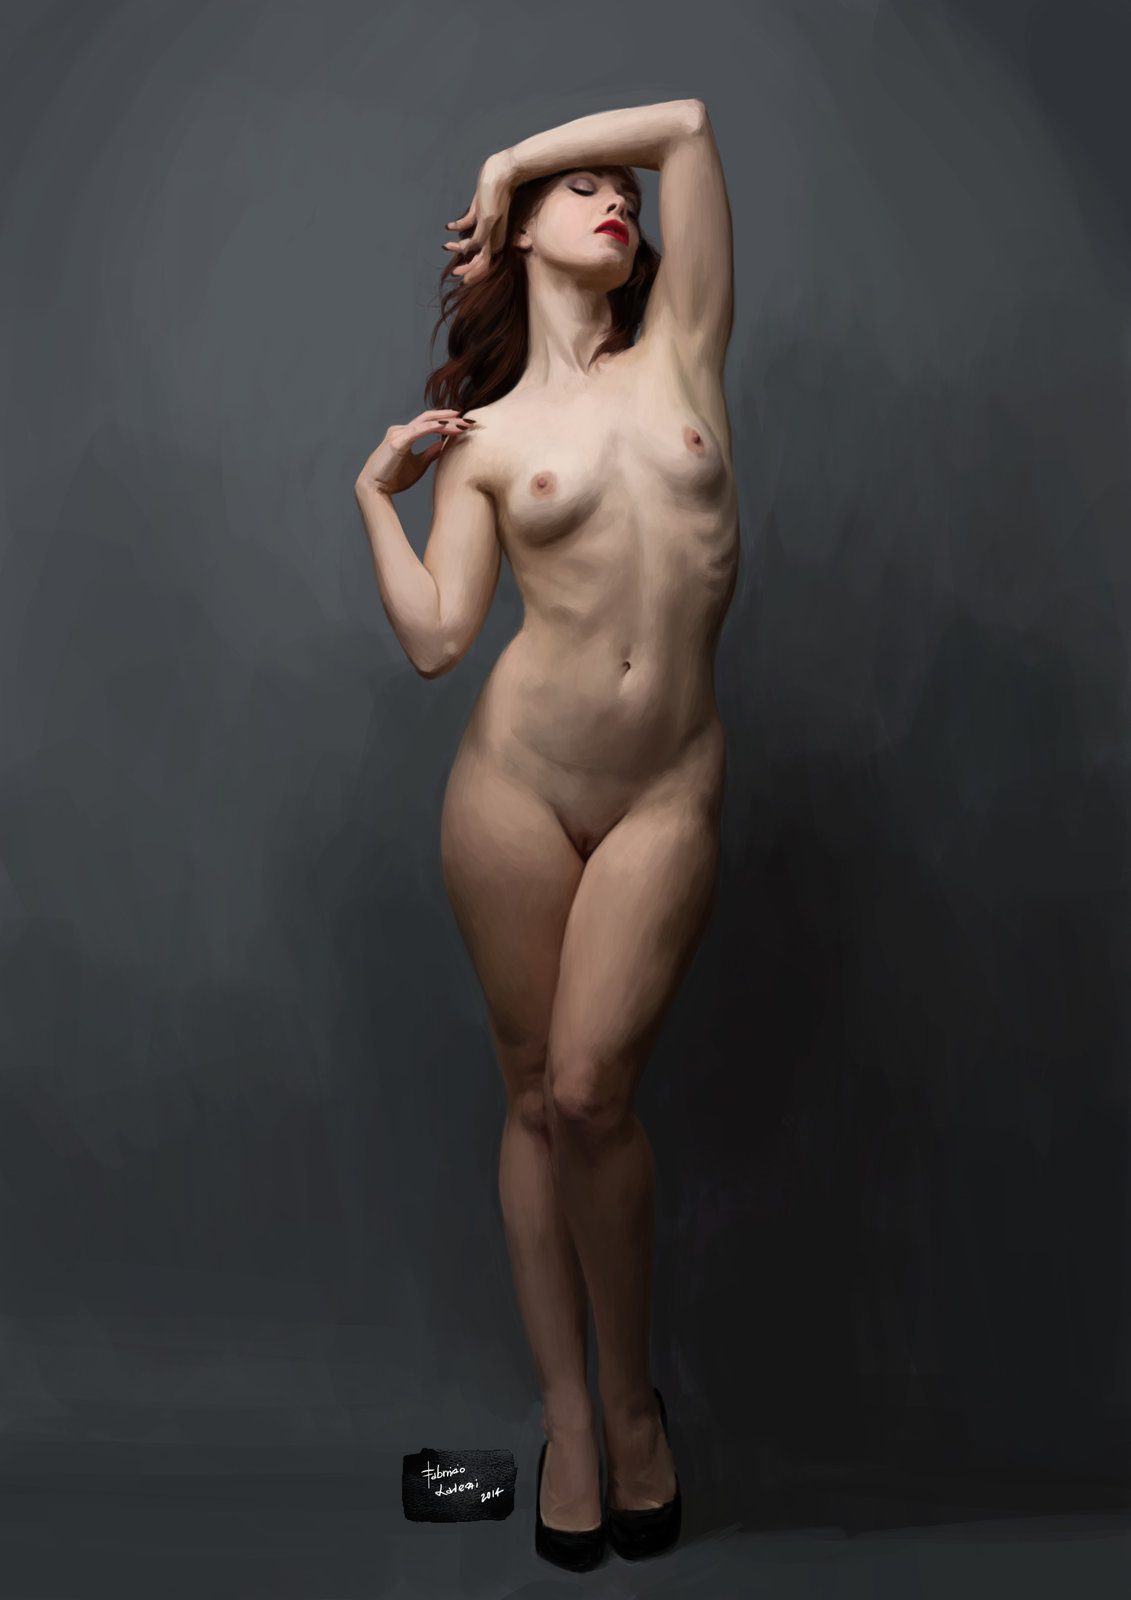 Nude study #1 (painting from photo on google images) .